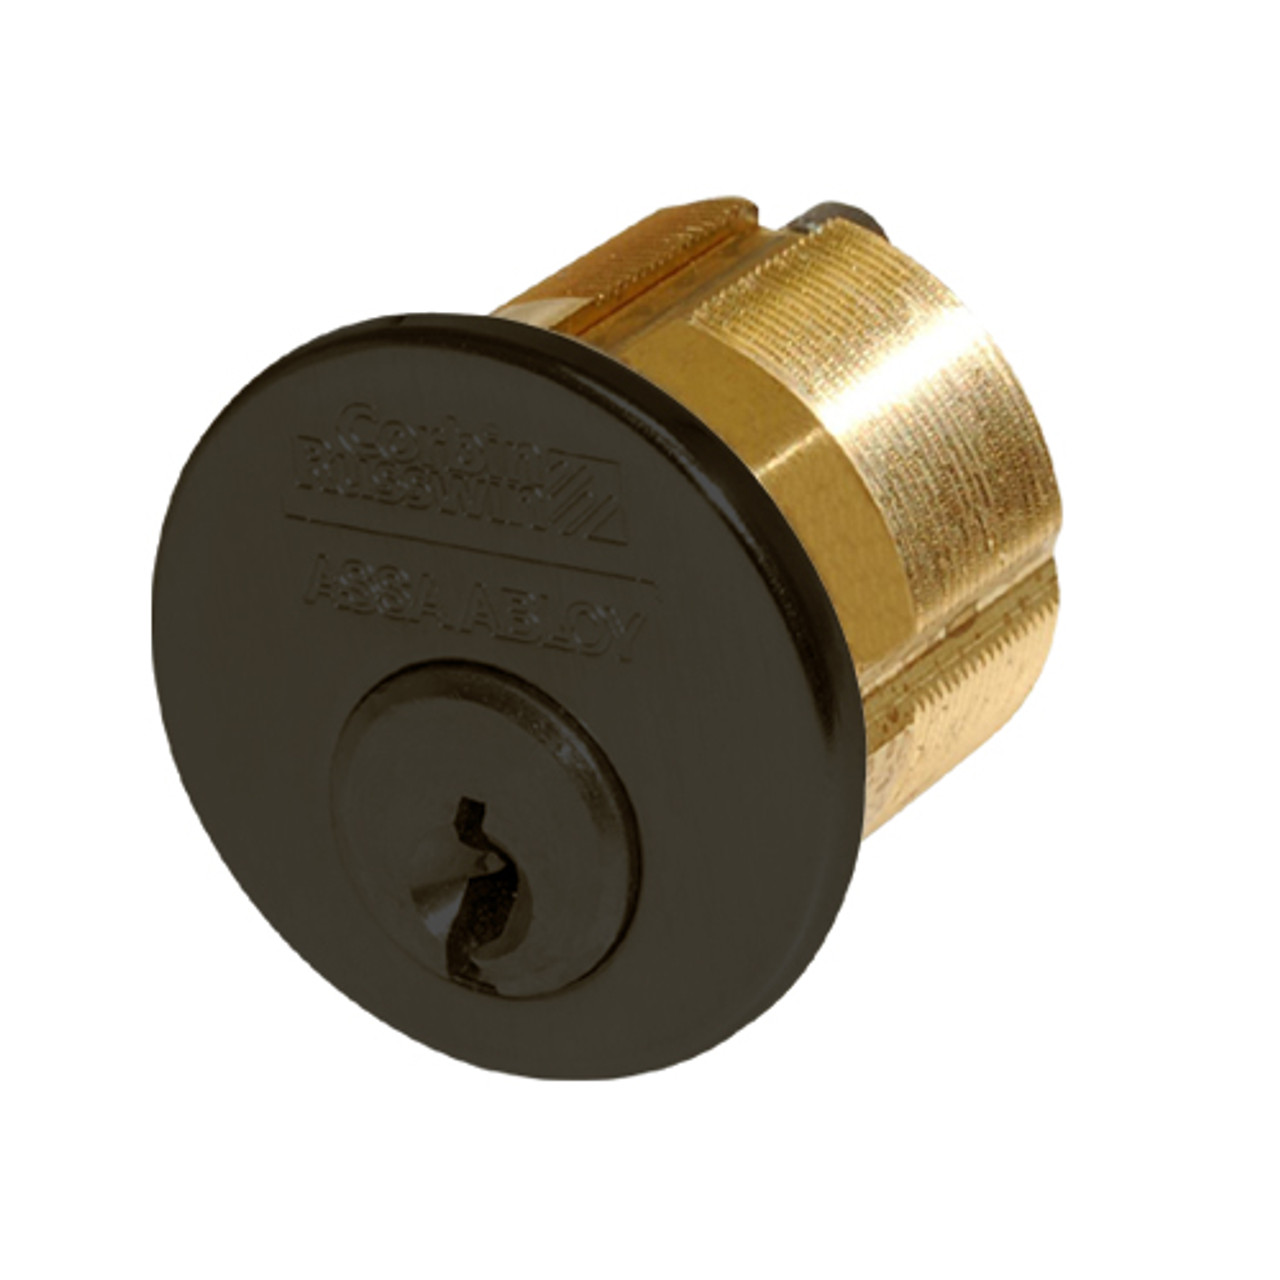 CR1000-138-A01-6-H1-613 Corbin Conventional Mortise Cylinder for Mortise Lock and DL3000 Deadlocks with Cloverleaf Cam in Oil Rubbed Bronze Finish